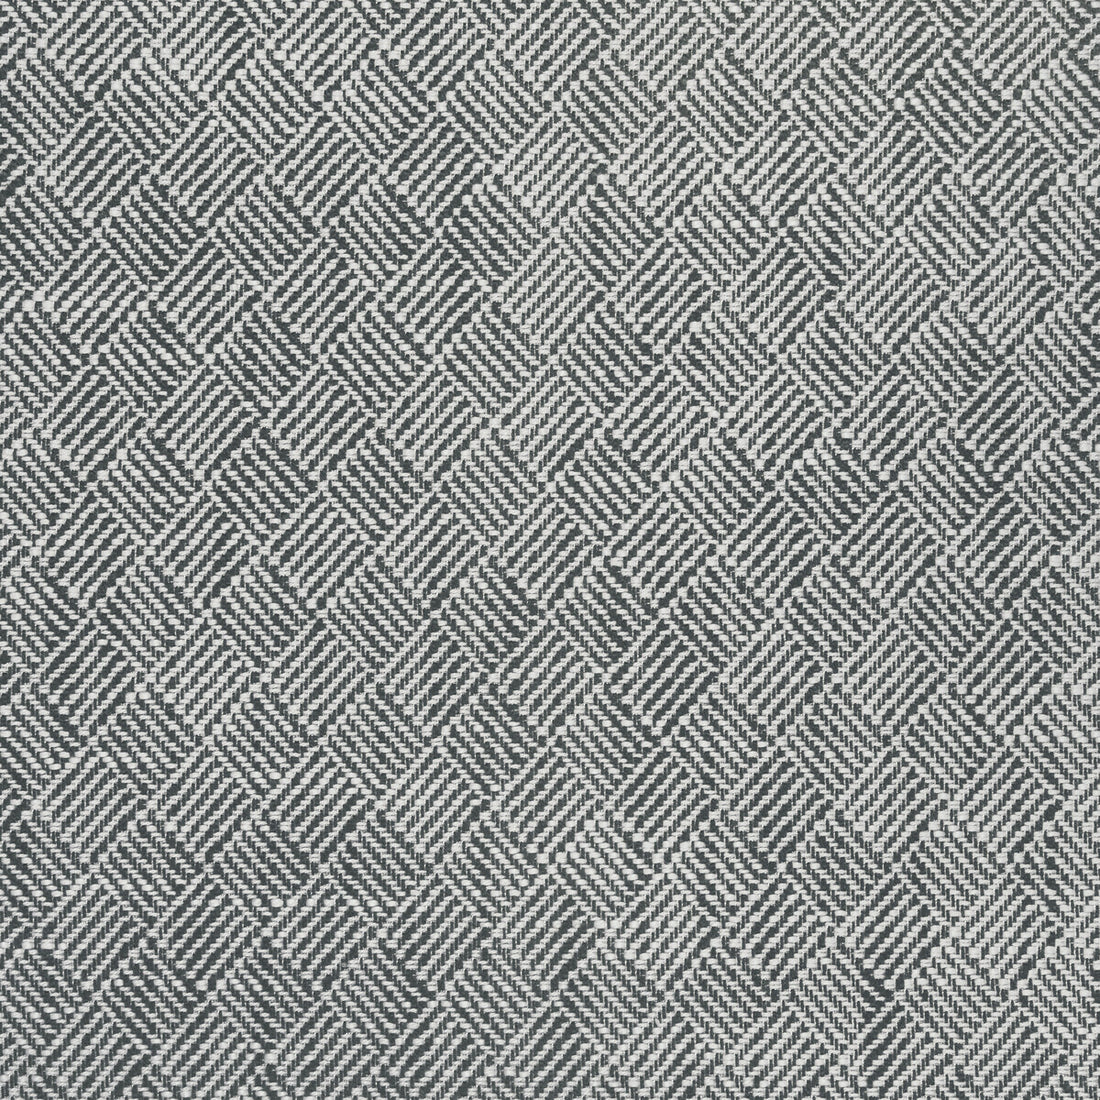 Kravet Design fabric in 36088-21 color - pattern 36088.21.0 - by Kravet Design in the Inside Out Performance Fabrics collection